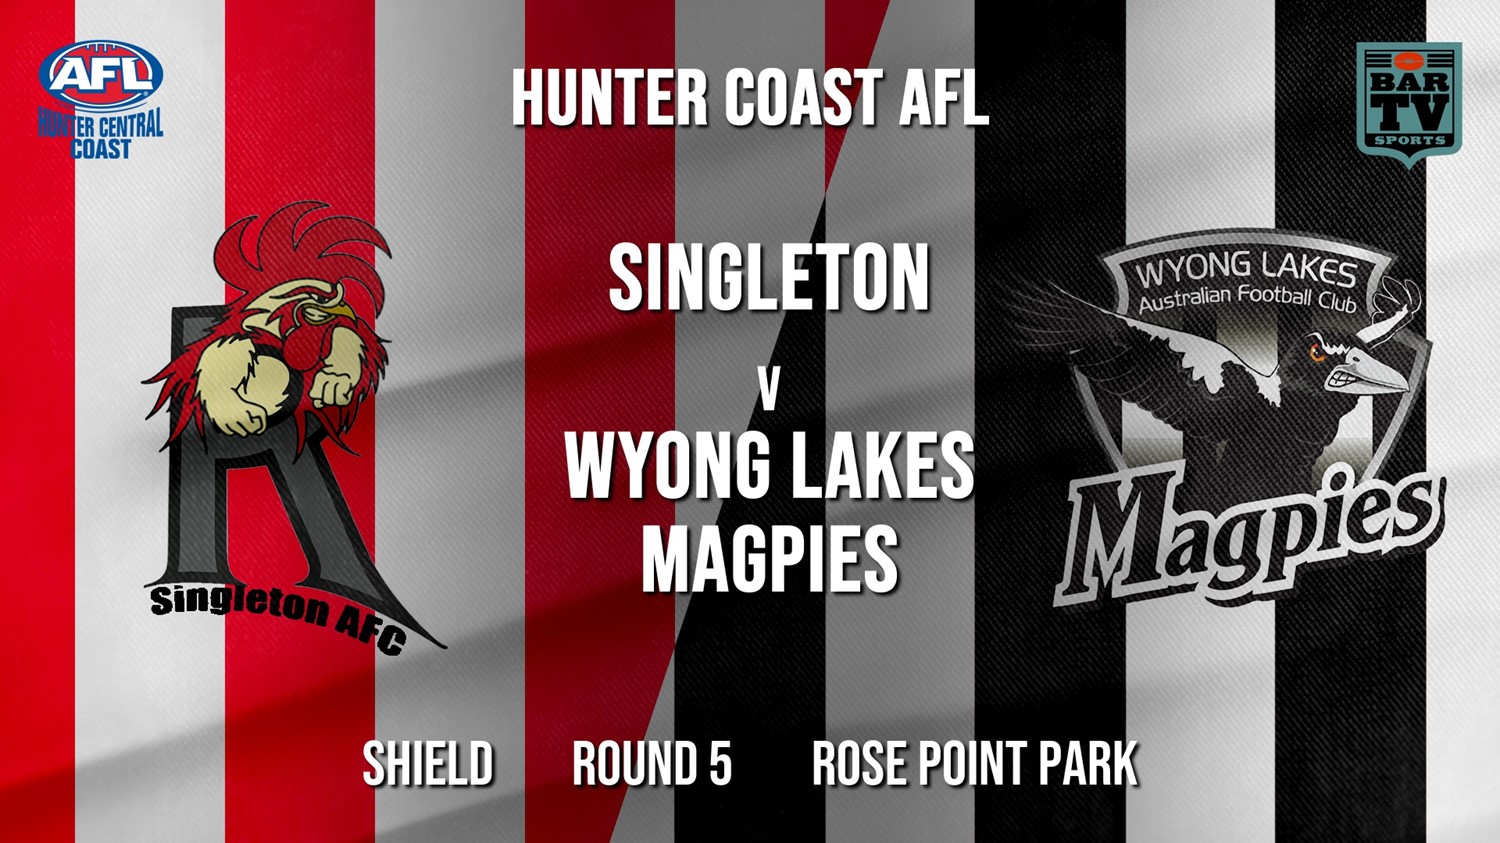 AFL HCC Round 5 - Shield - Singleton Roosters v Wyong Lakes Magpies Minigame Slate Image